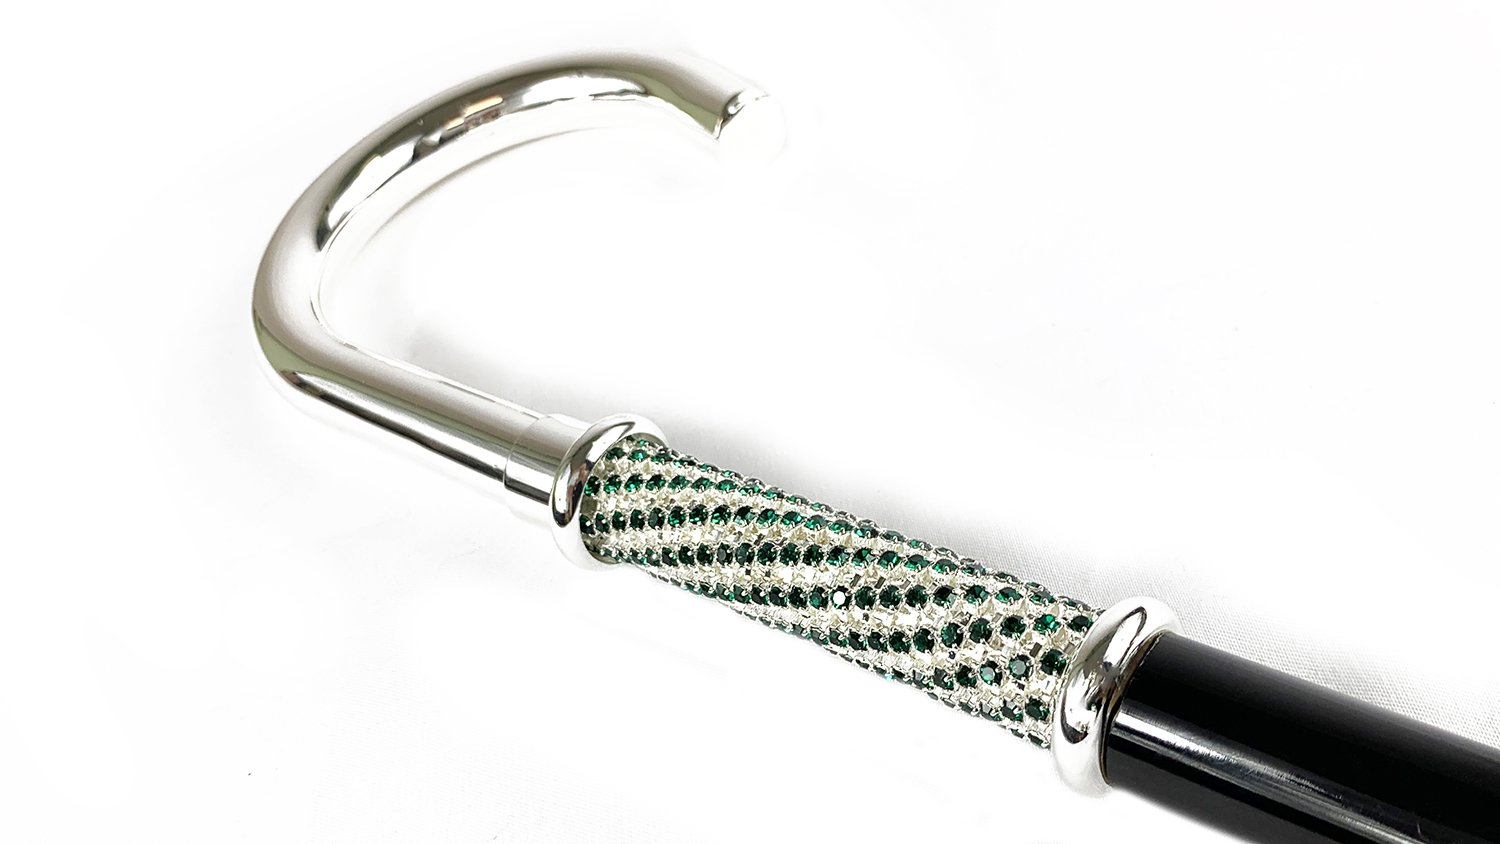 Walking Stick With Silver Plated Handle, Full of Emerald Rhinestones - IL MARCHESATO LUXURY UMBRELLAS, CANES AND SHOEHORNS